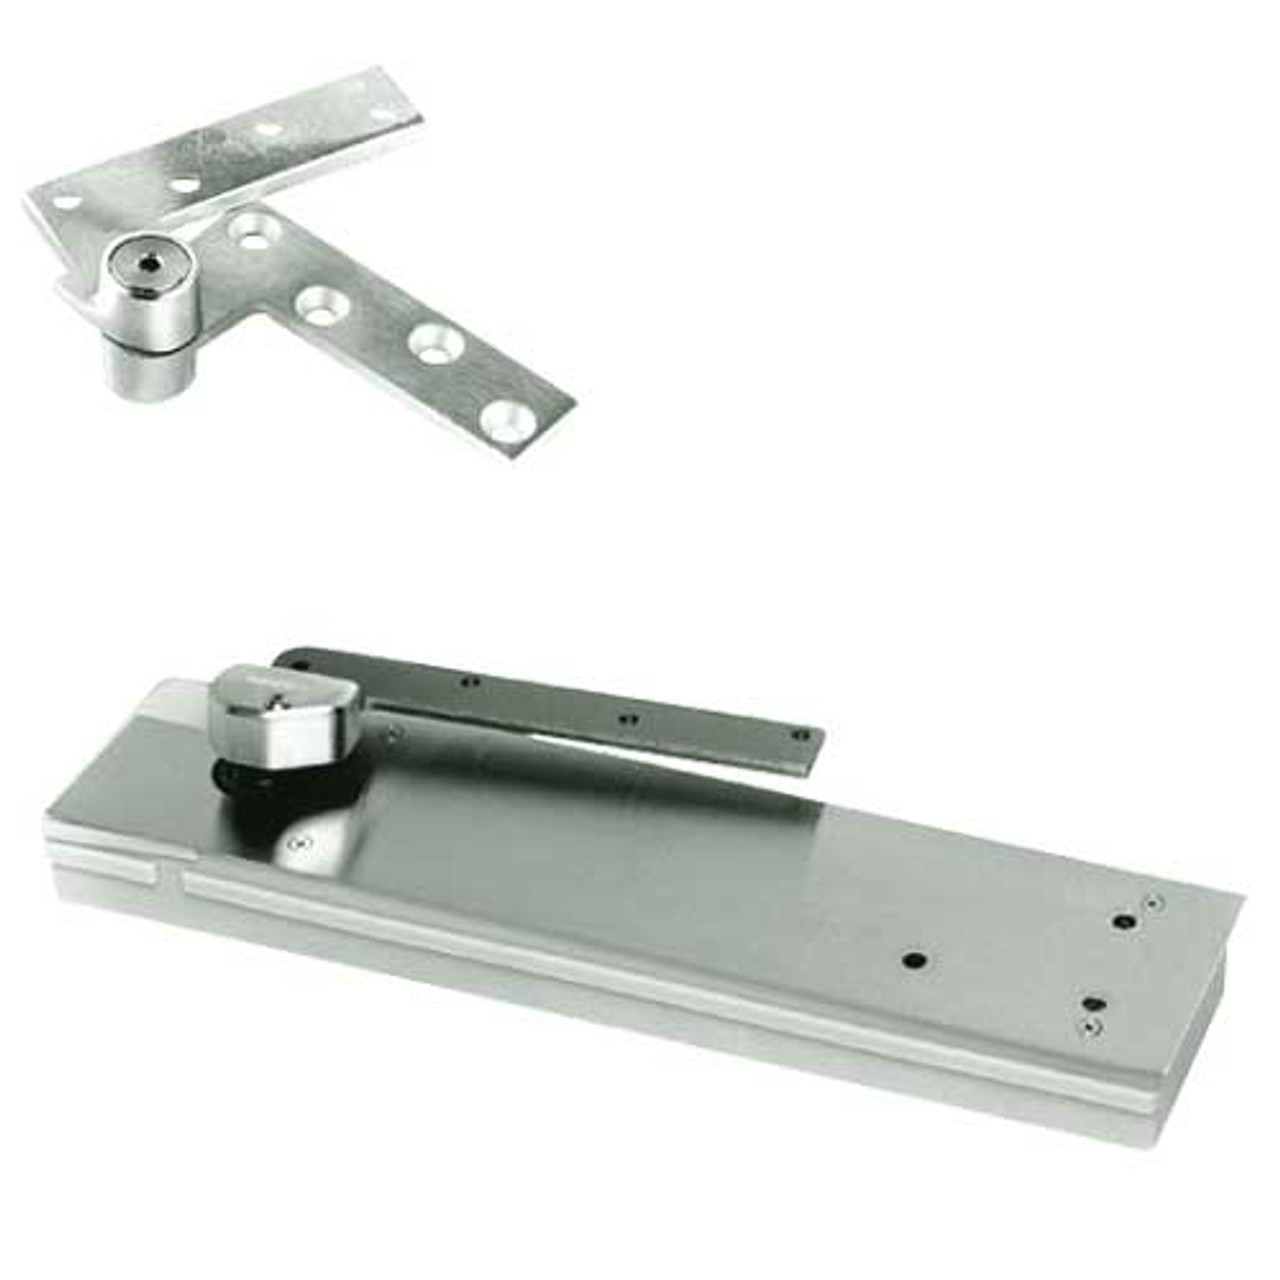 5103ABC105-LTP-RH-618 Rixson 51 Series 3/4" Offset Hung Shallow Depth Floor Closers in Bright Nickel Finish